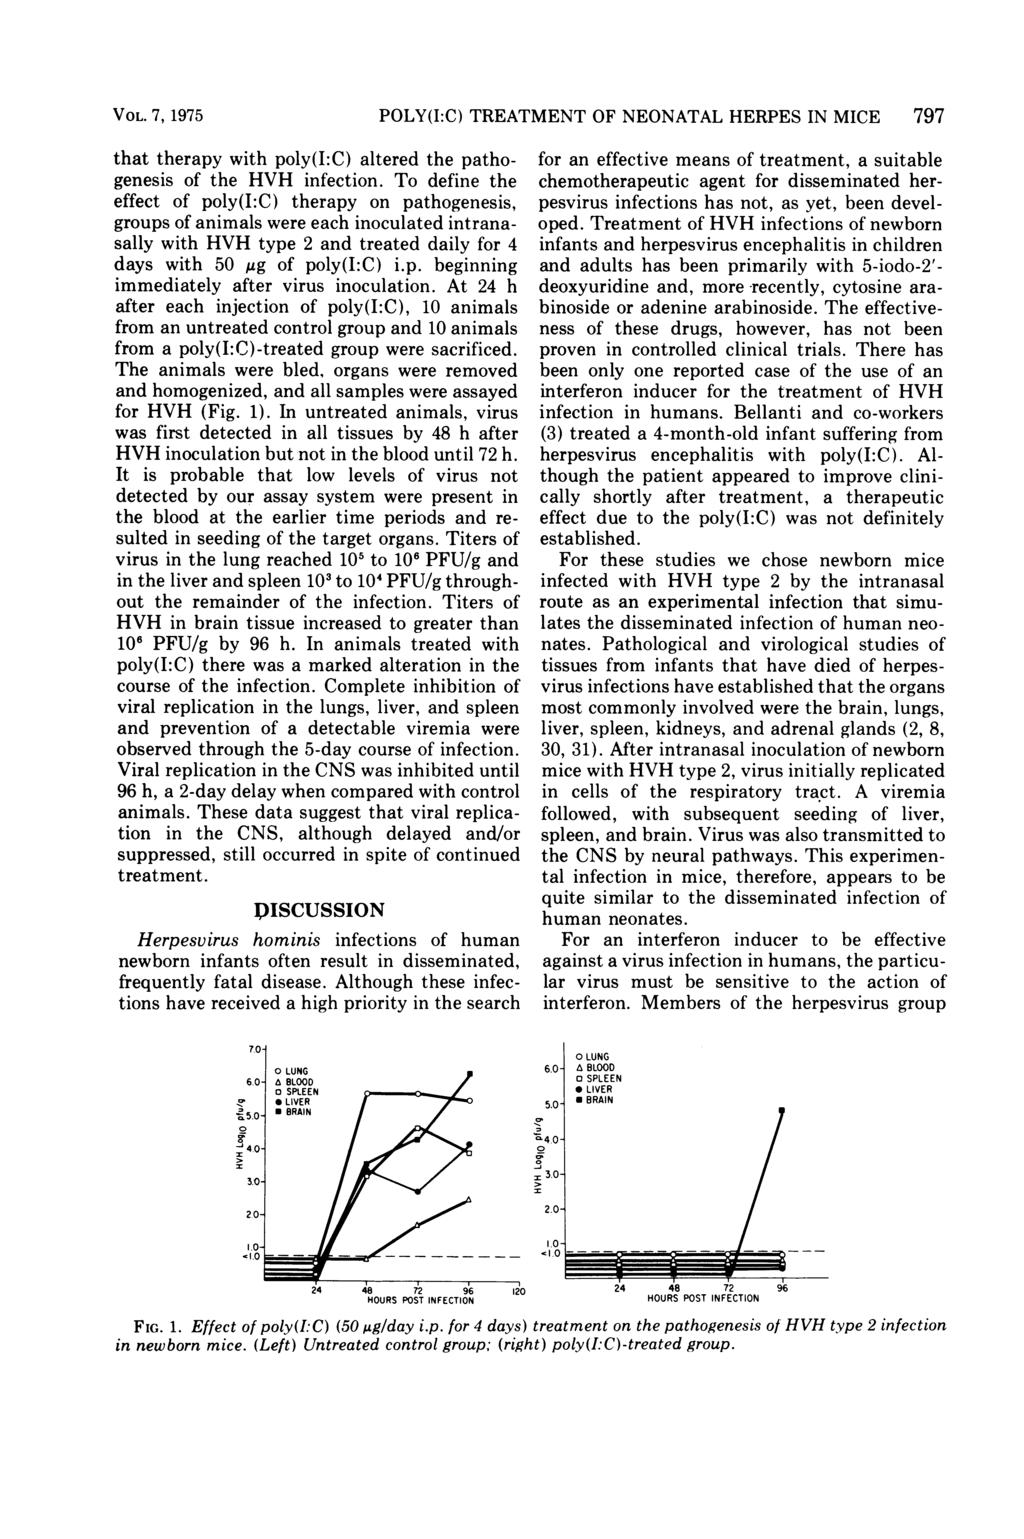 VOL. 7, 1975 that therapy with poly(i:c) altered the pathogenesis of the HVH infection.